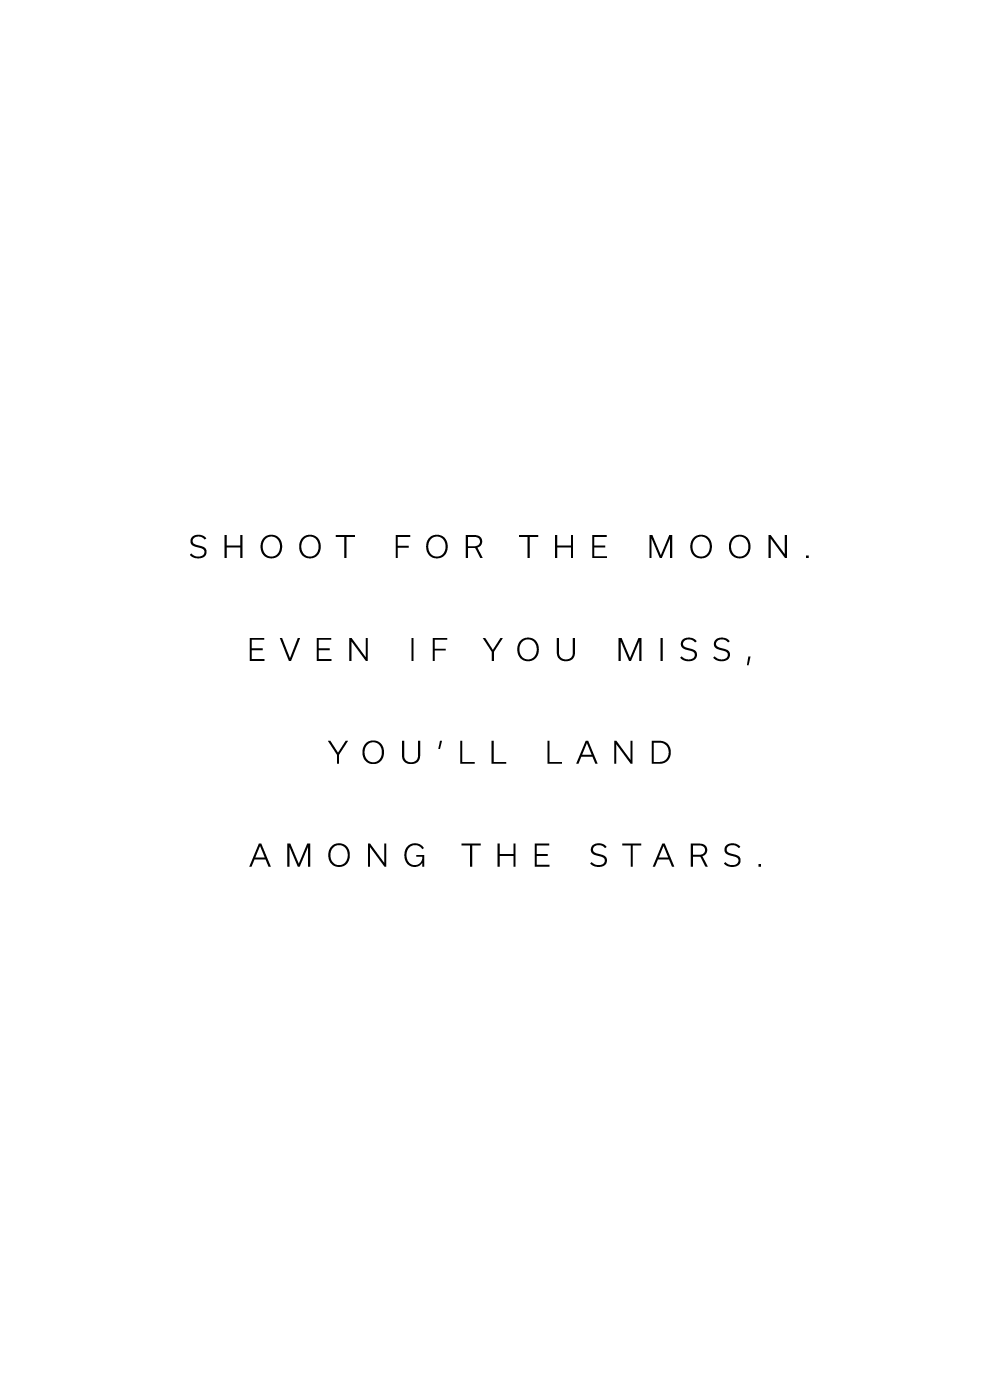 "Shoot for the moon. Even if you miss, you'll land among the stars" citatplakat